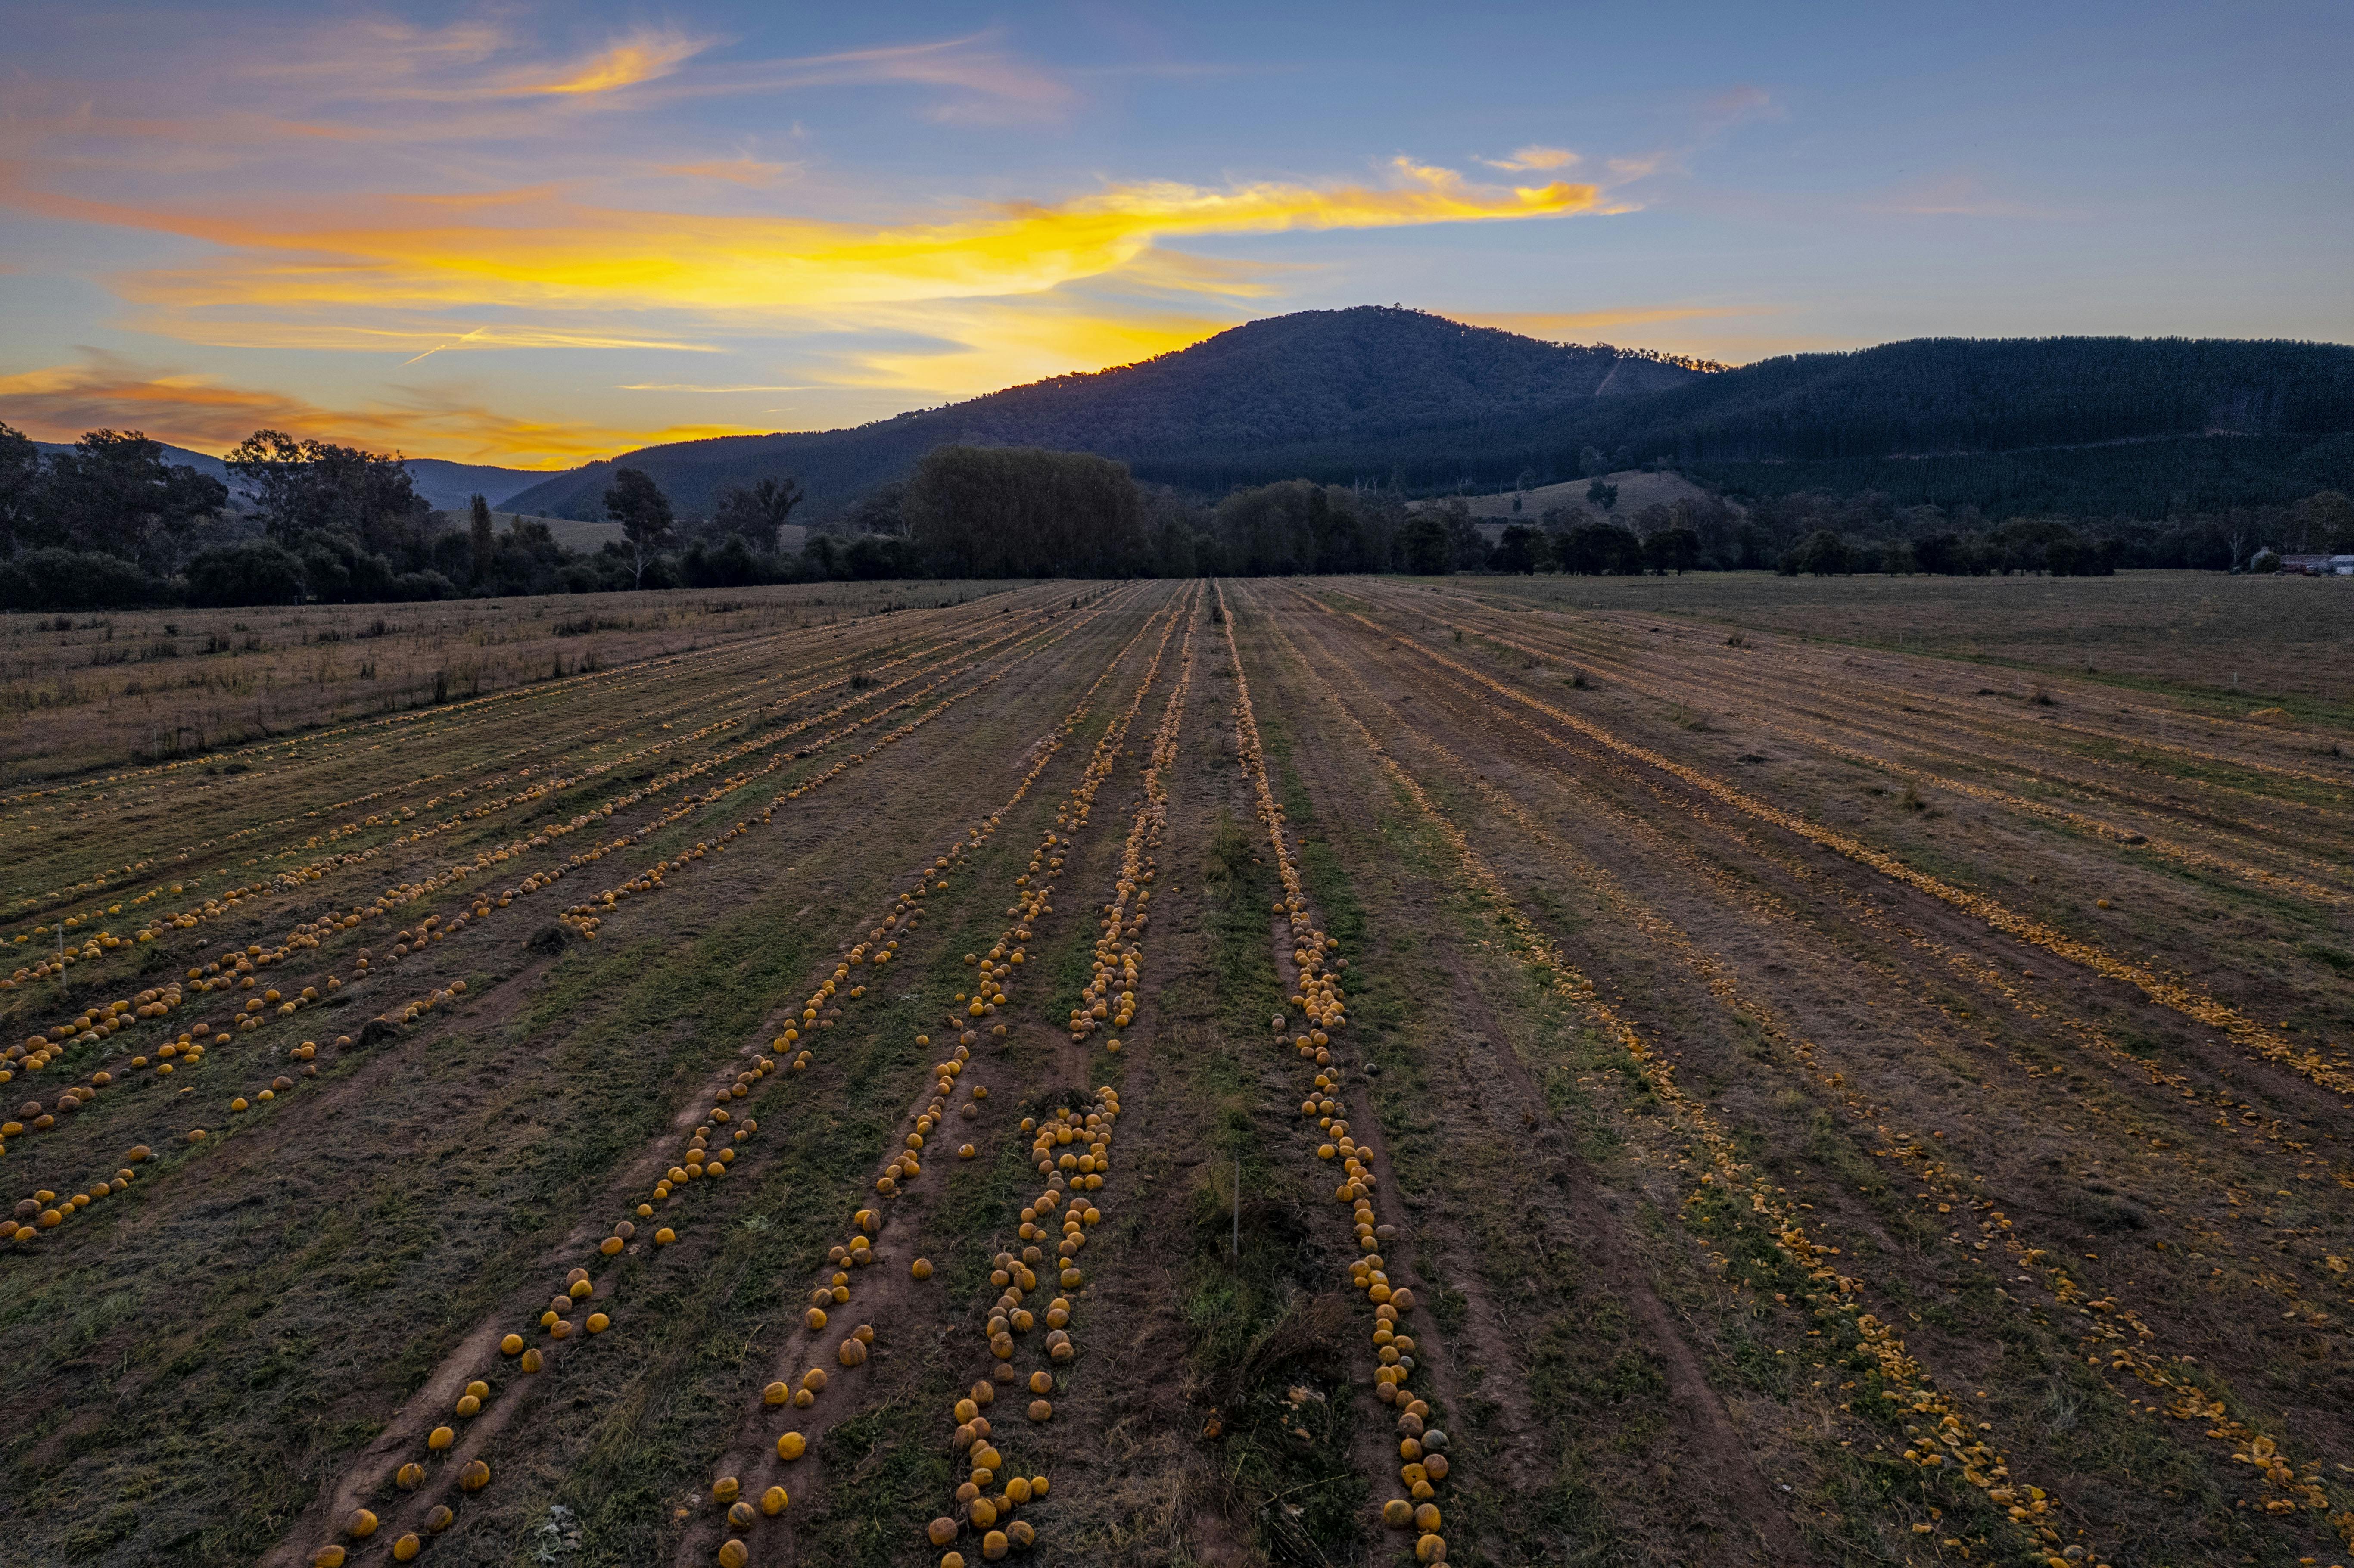 A field of pumpkins with the sun setting over the mountains behind